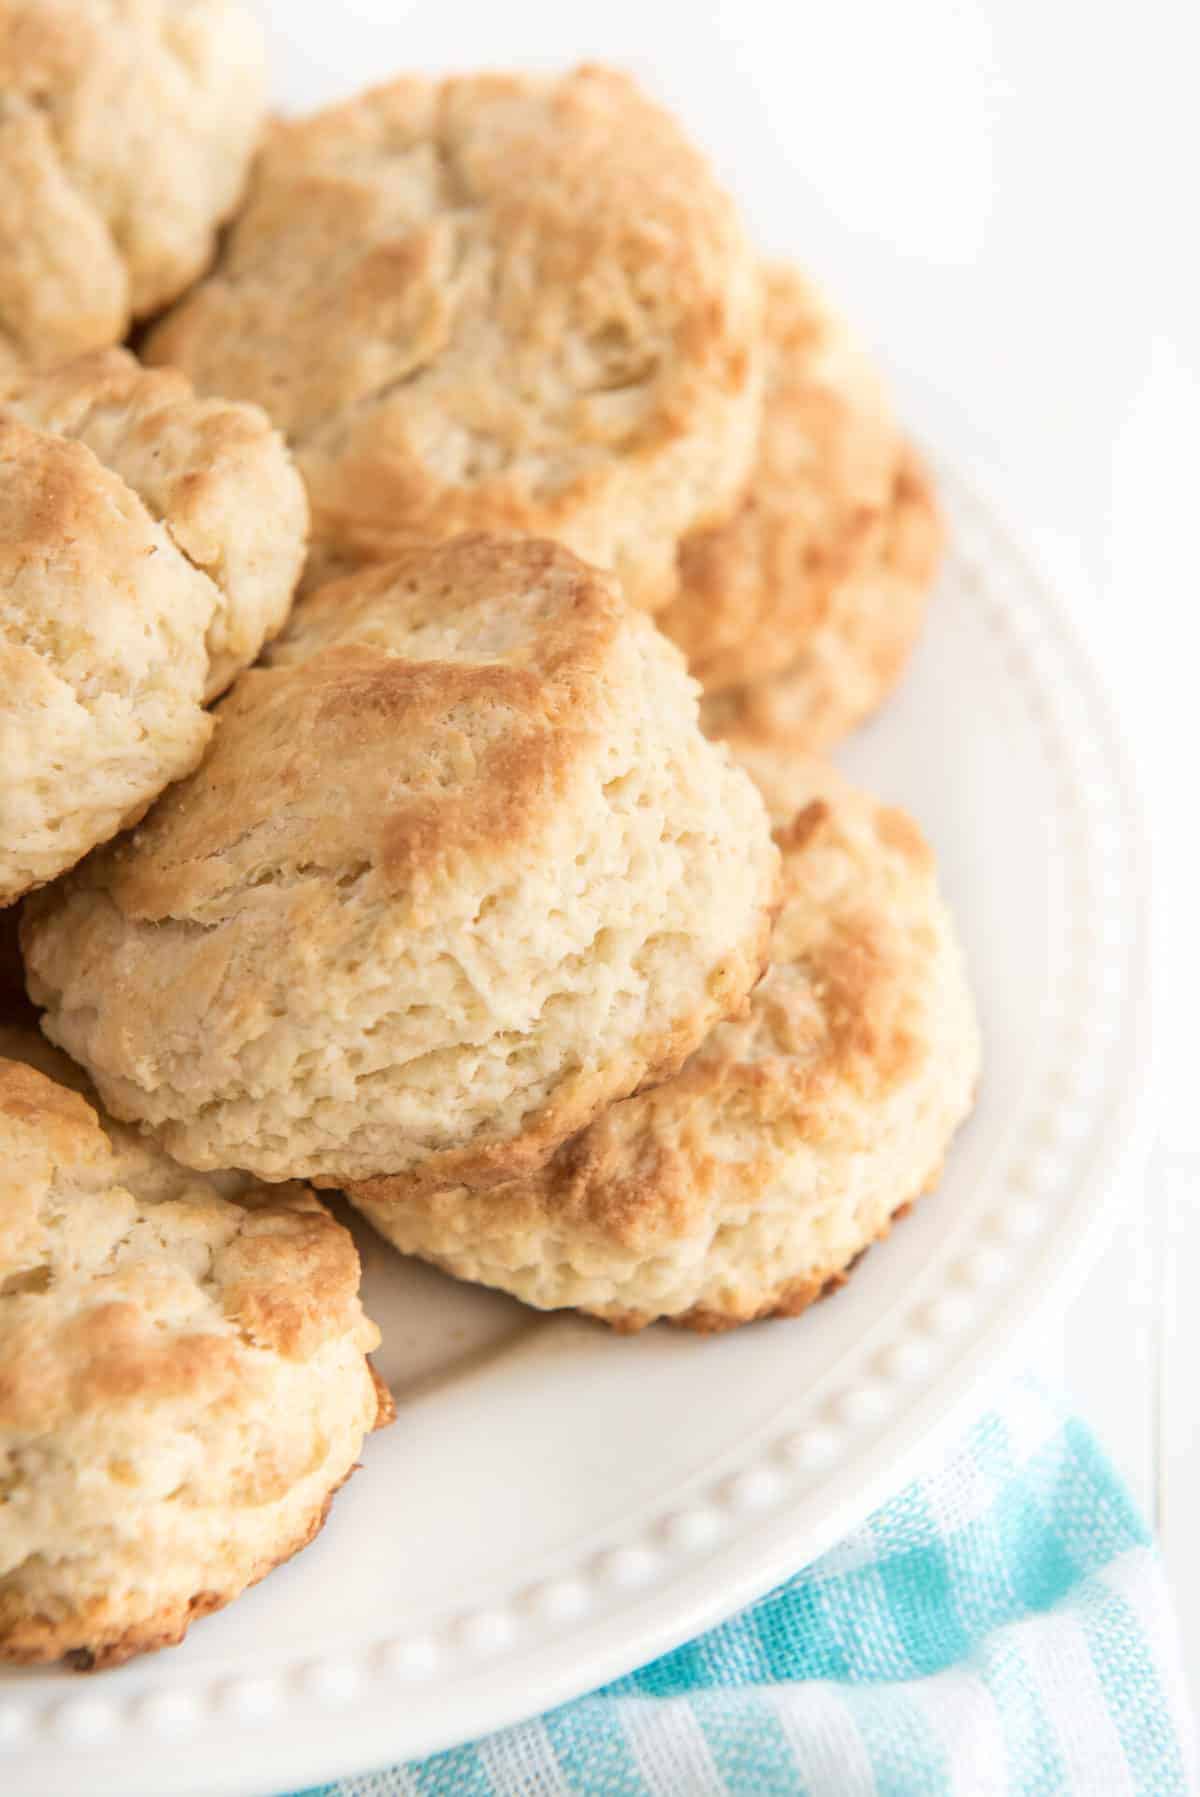 https://www.blessthismessplease.com/wp-content/uploads/2012/02/basic-butter-biscuits-9-1.jpg